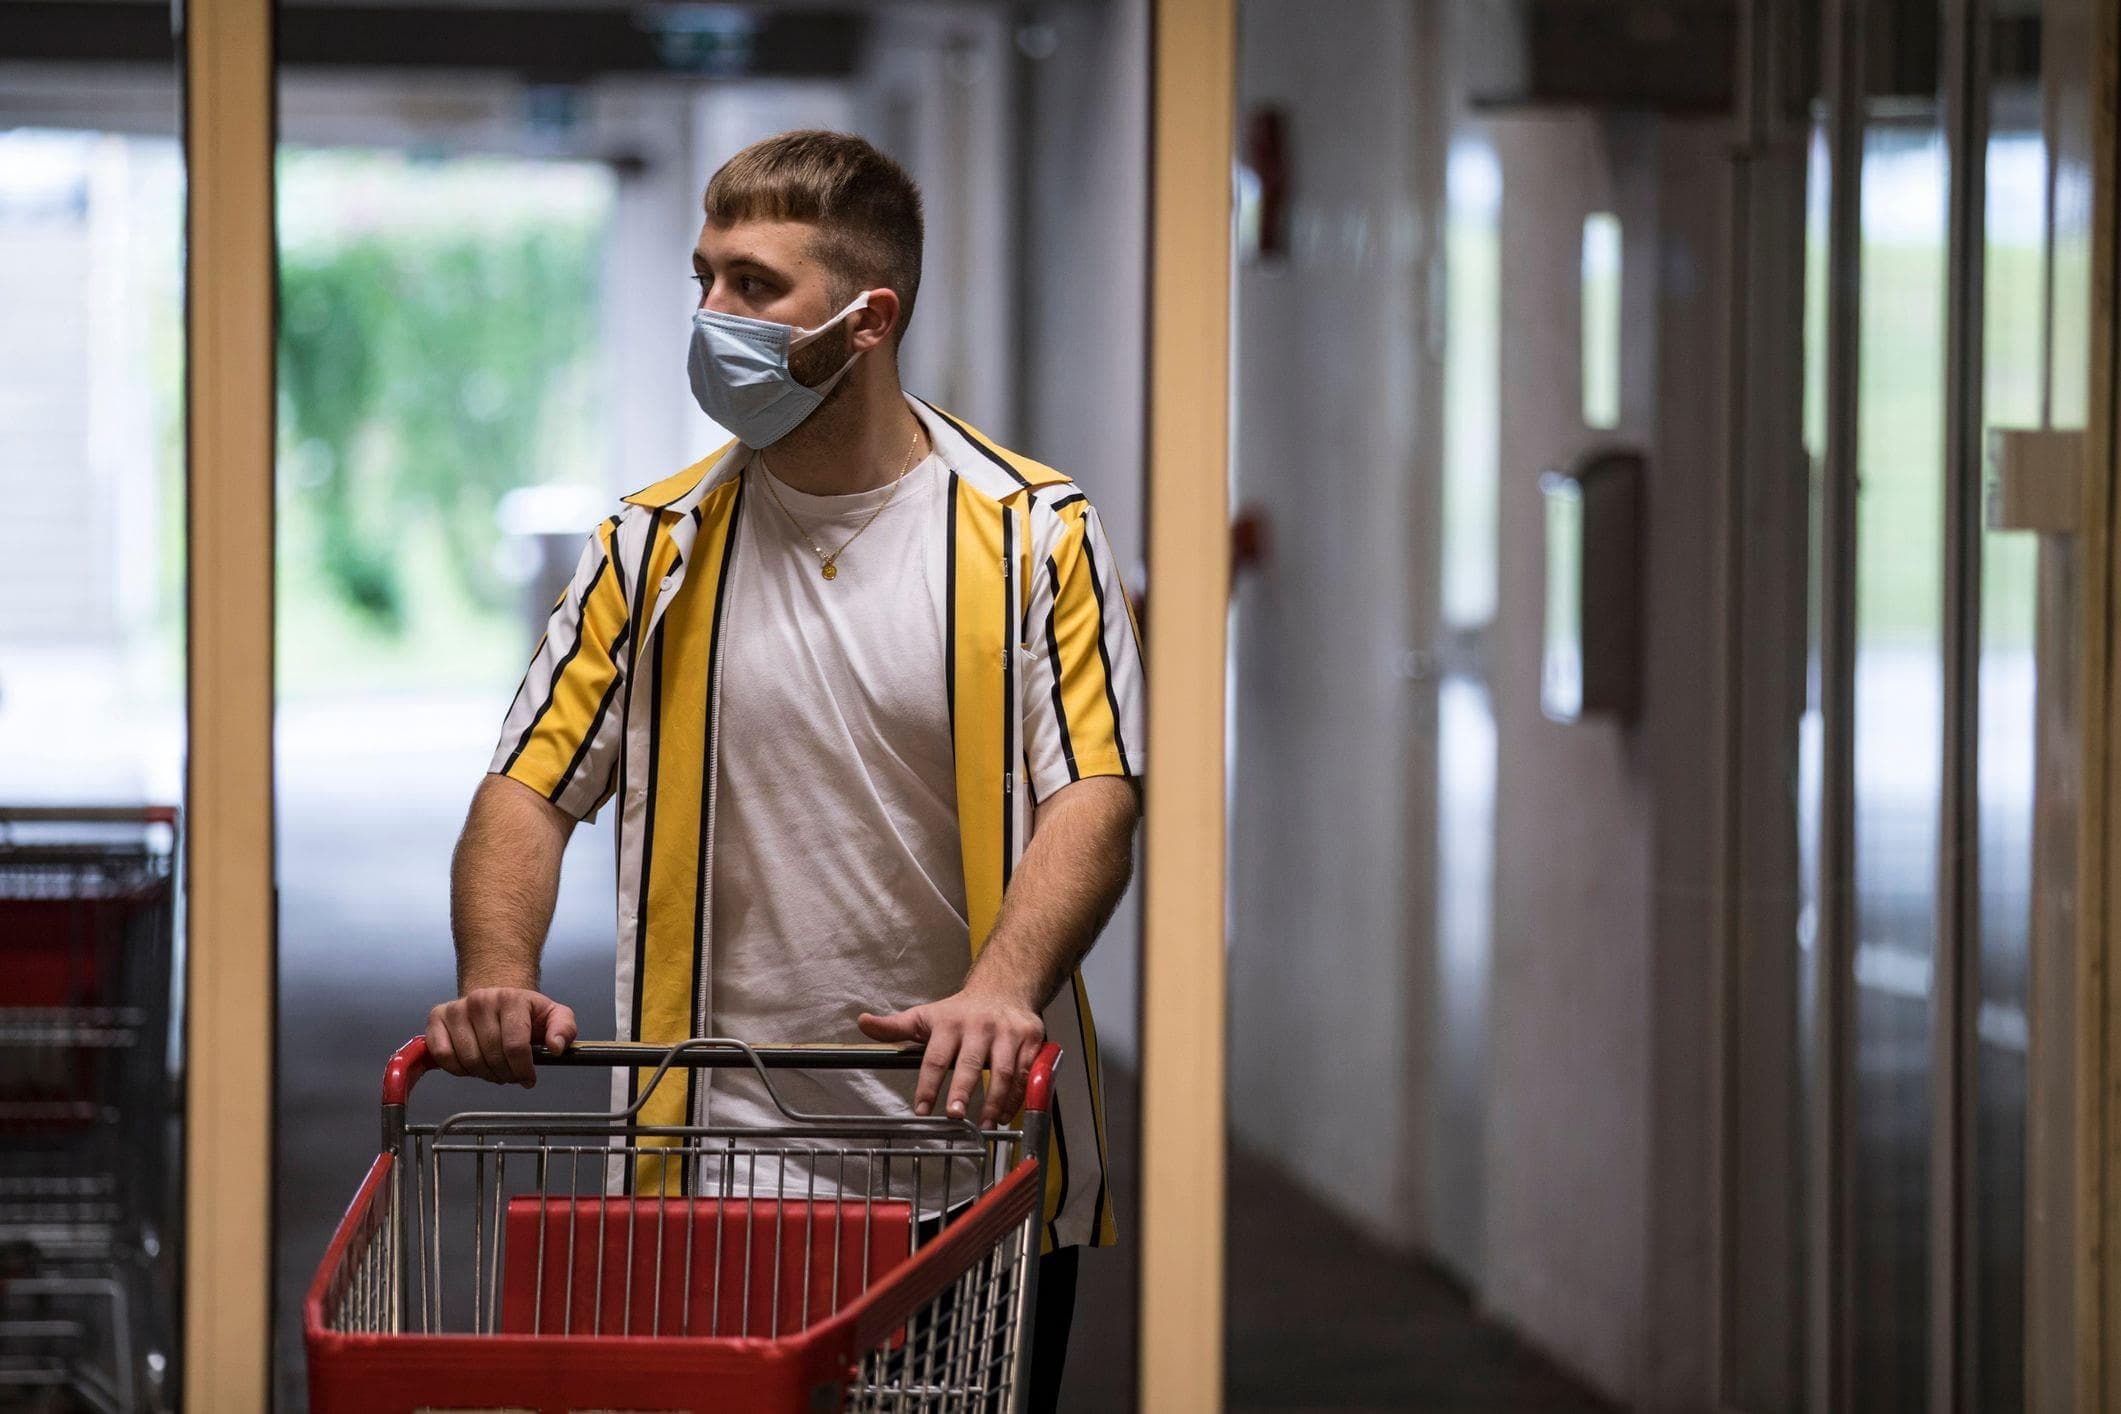 a young man wearing a medical face mask pushes a shopping cart to enter automatic grocery store doors